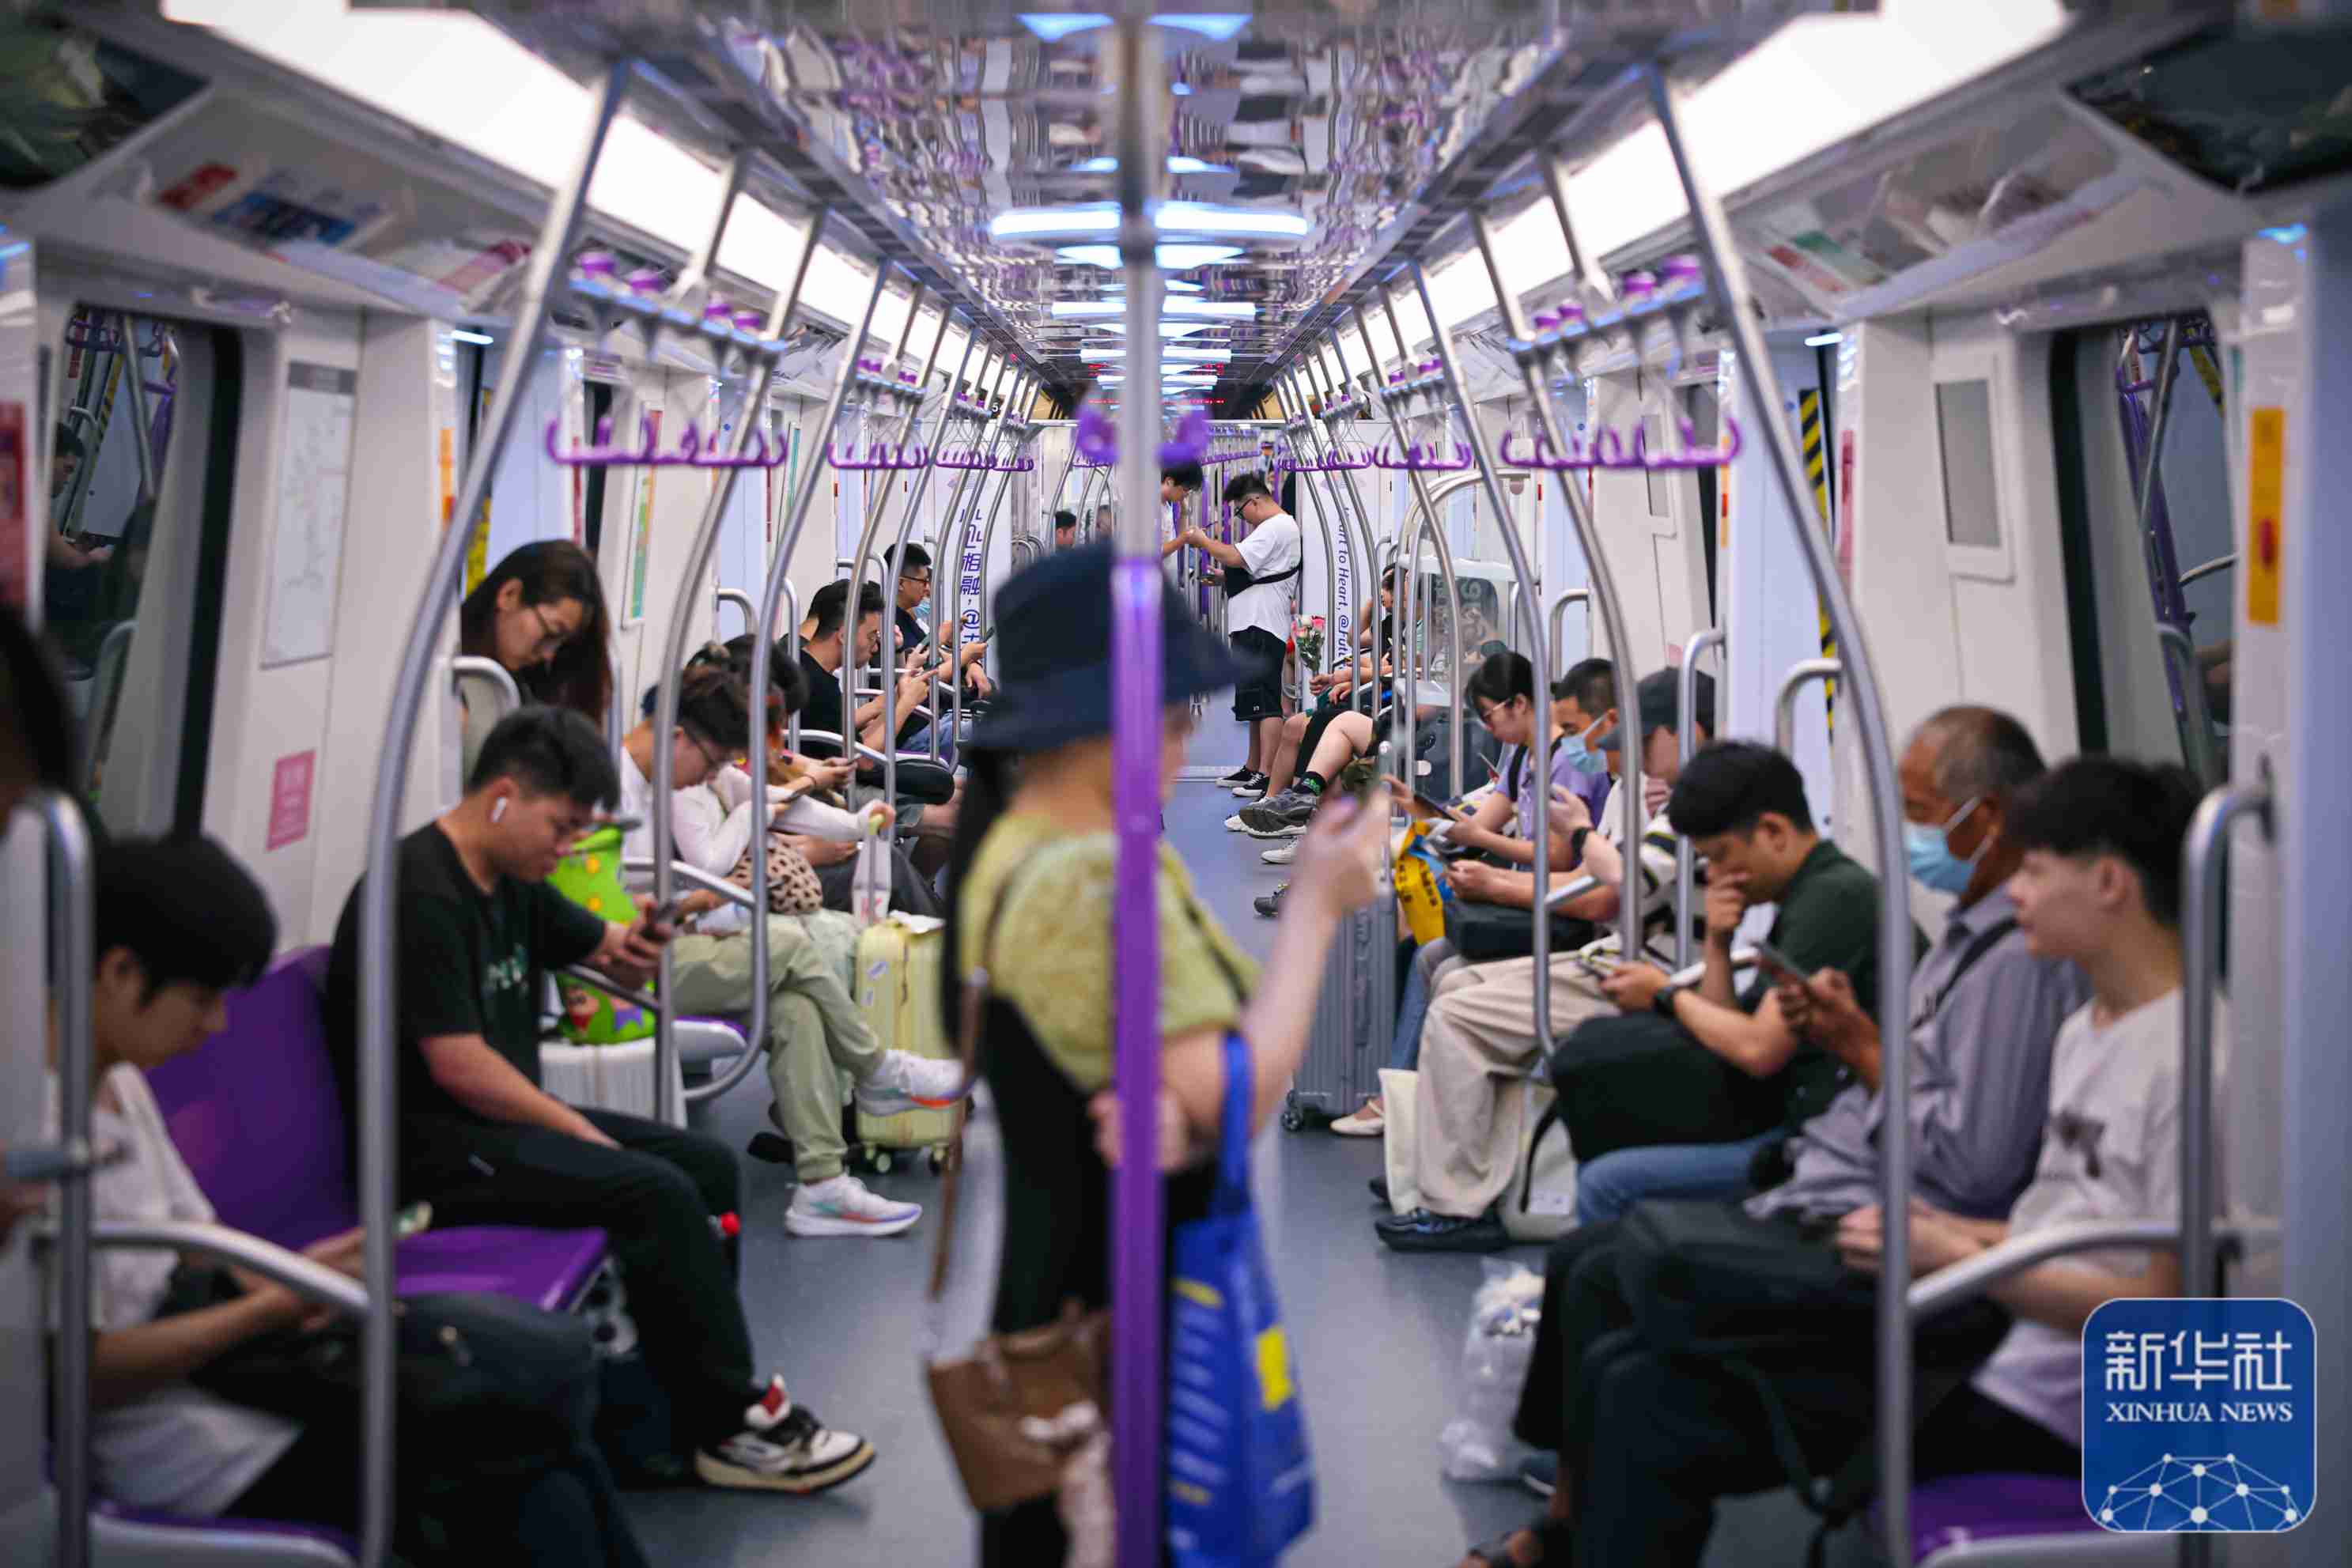 Check in on the Hangzhou Metro "Asian Games" special train